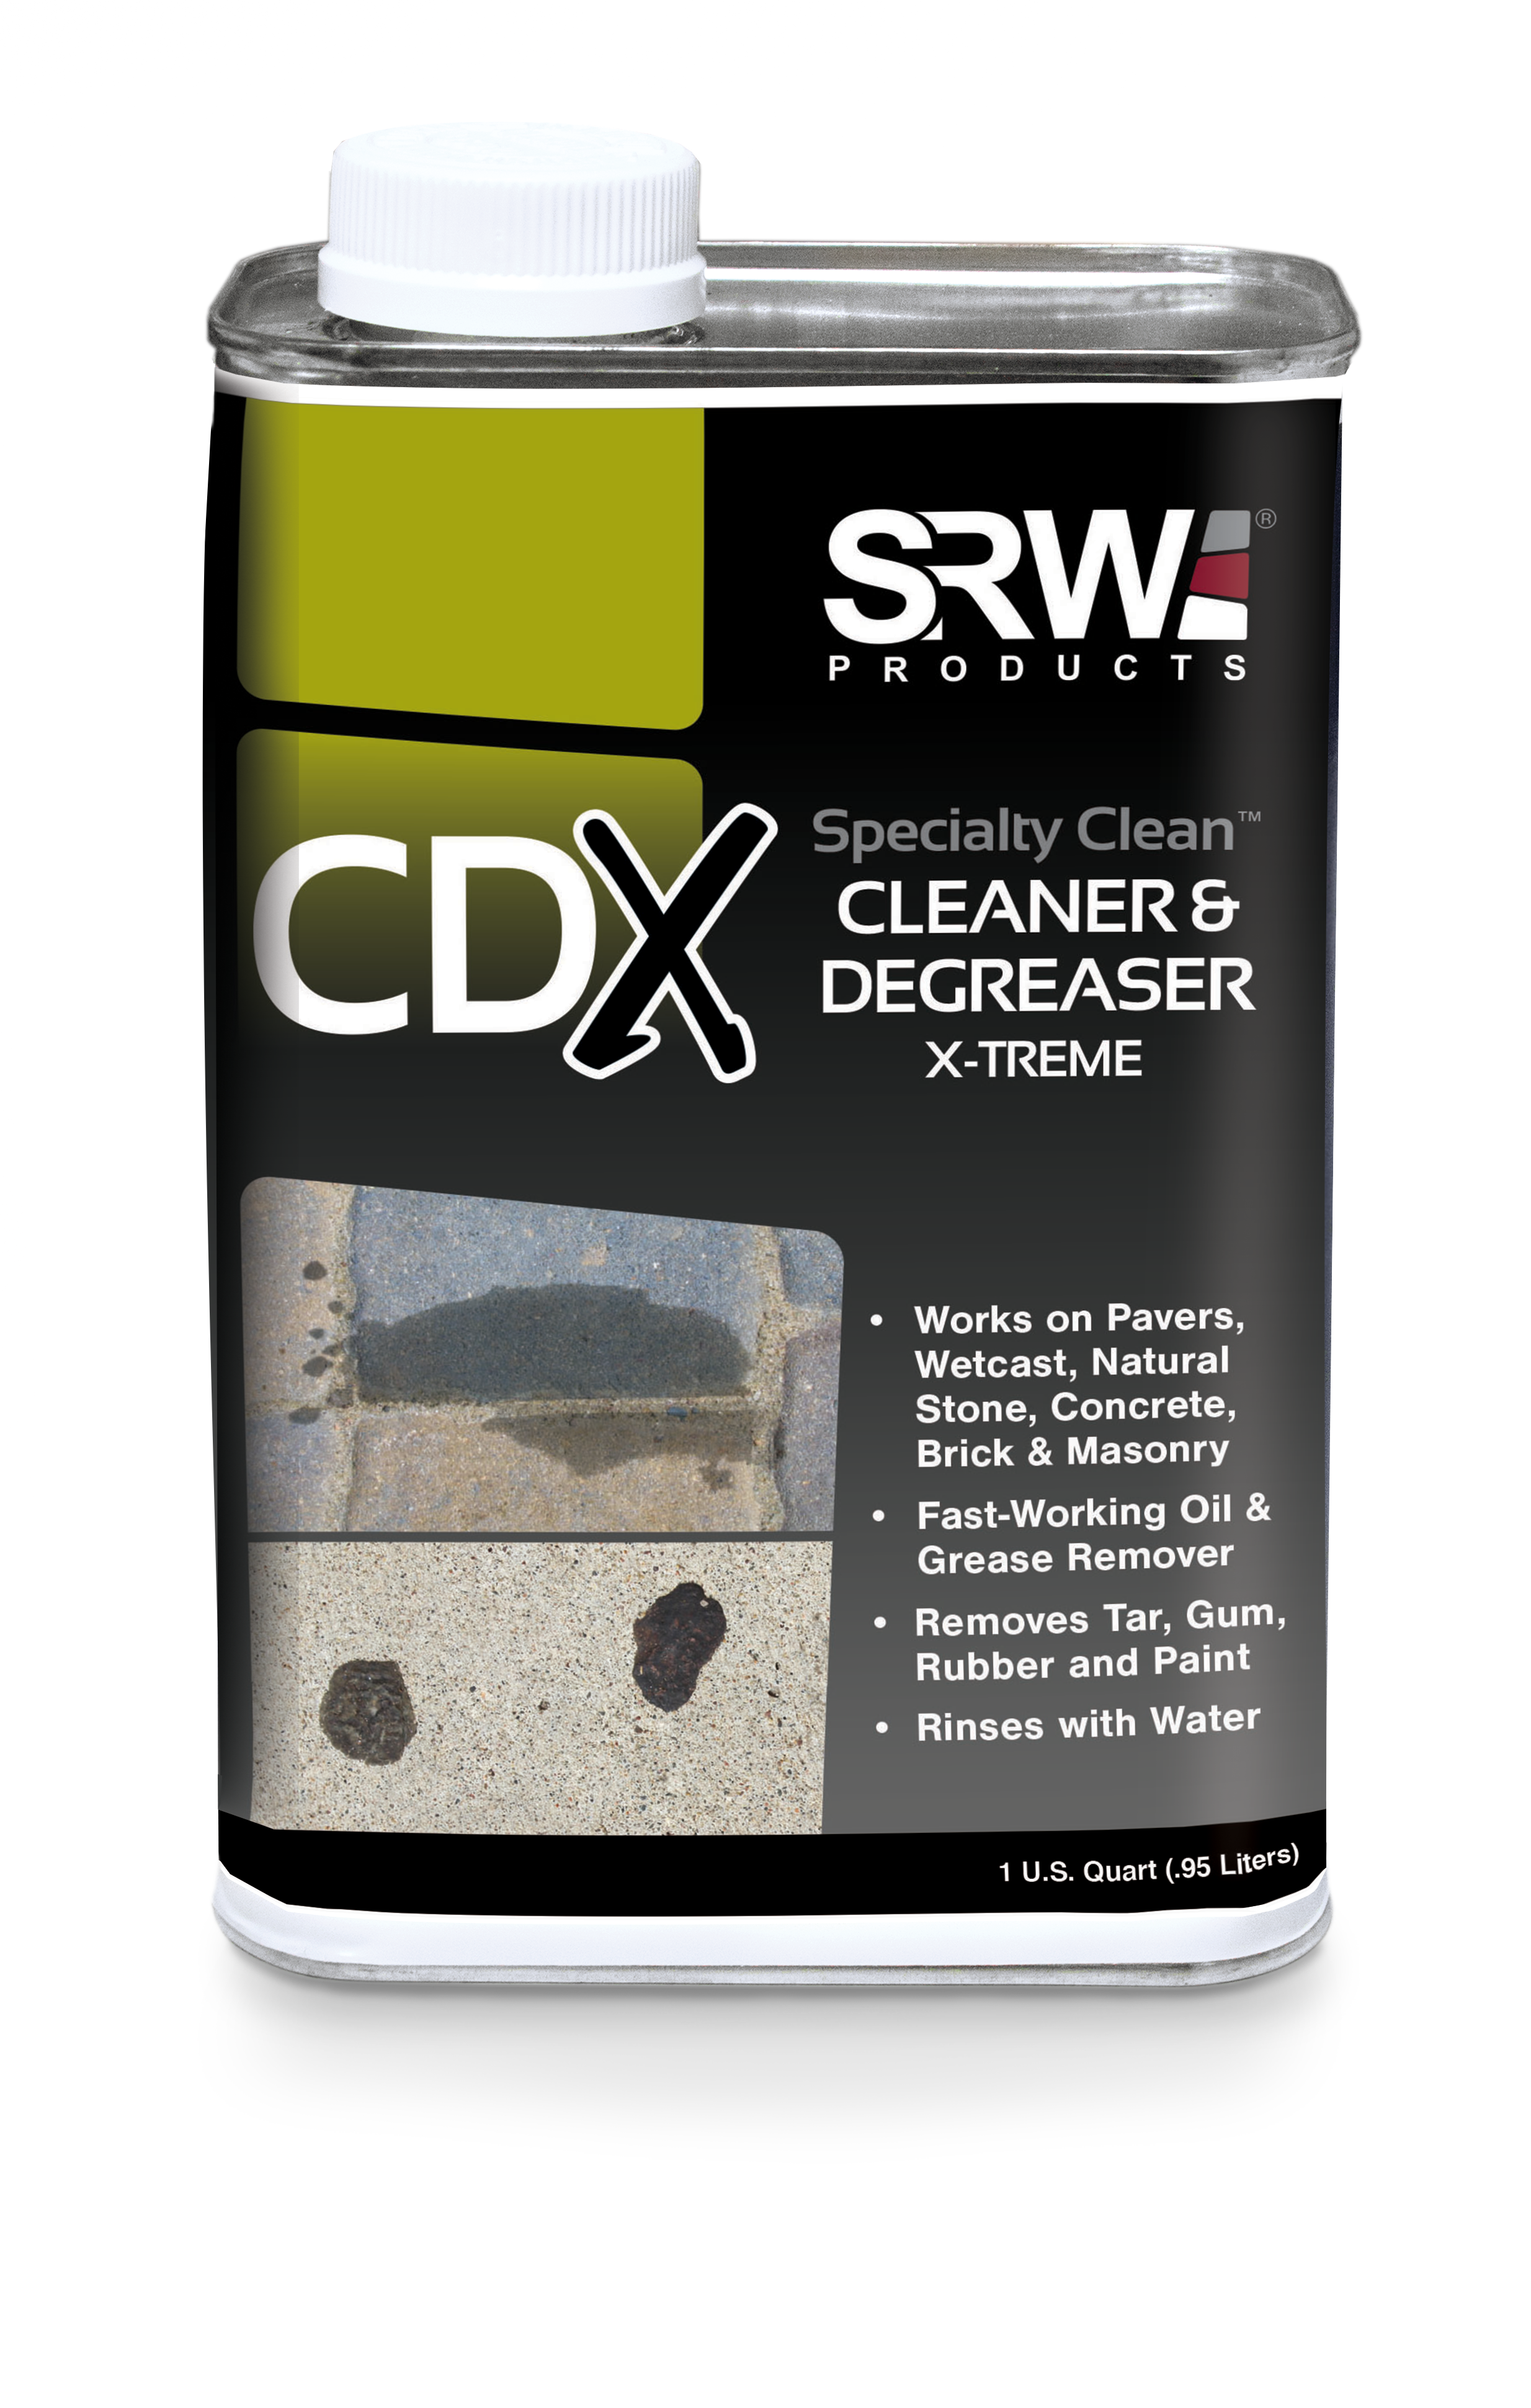 Container of Cleaner & Degreaser